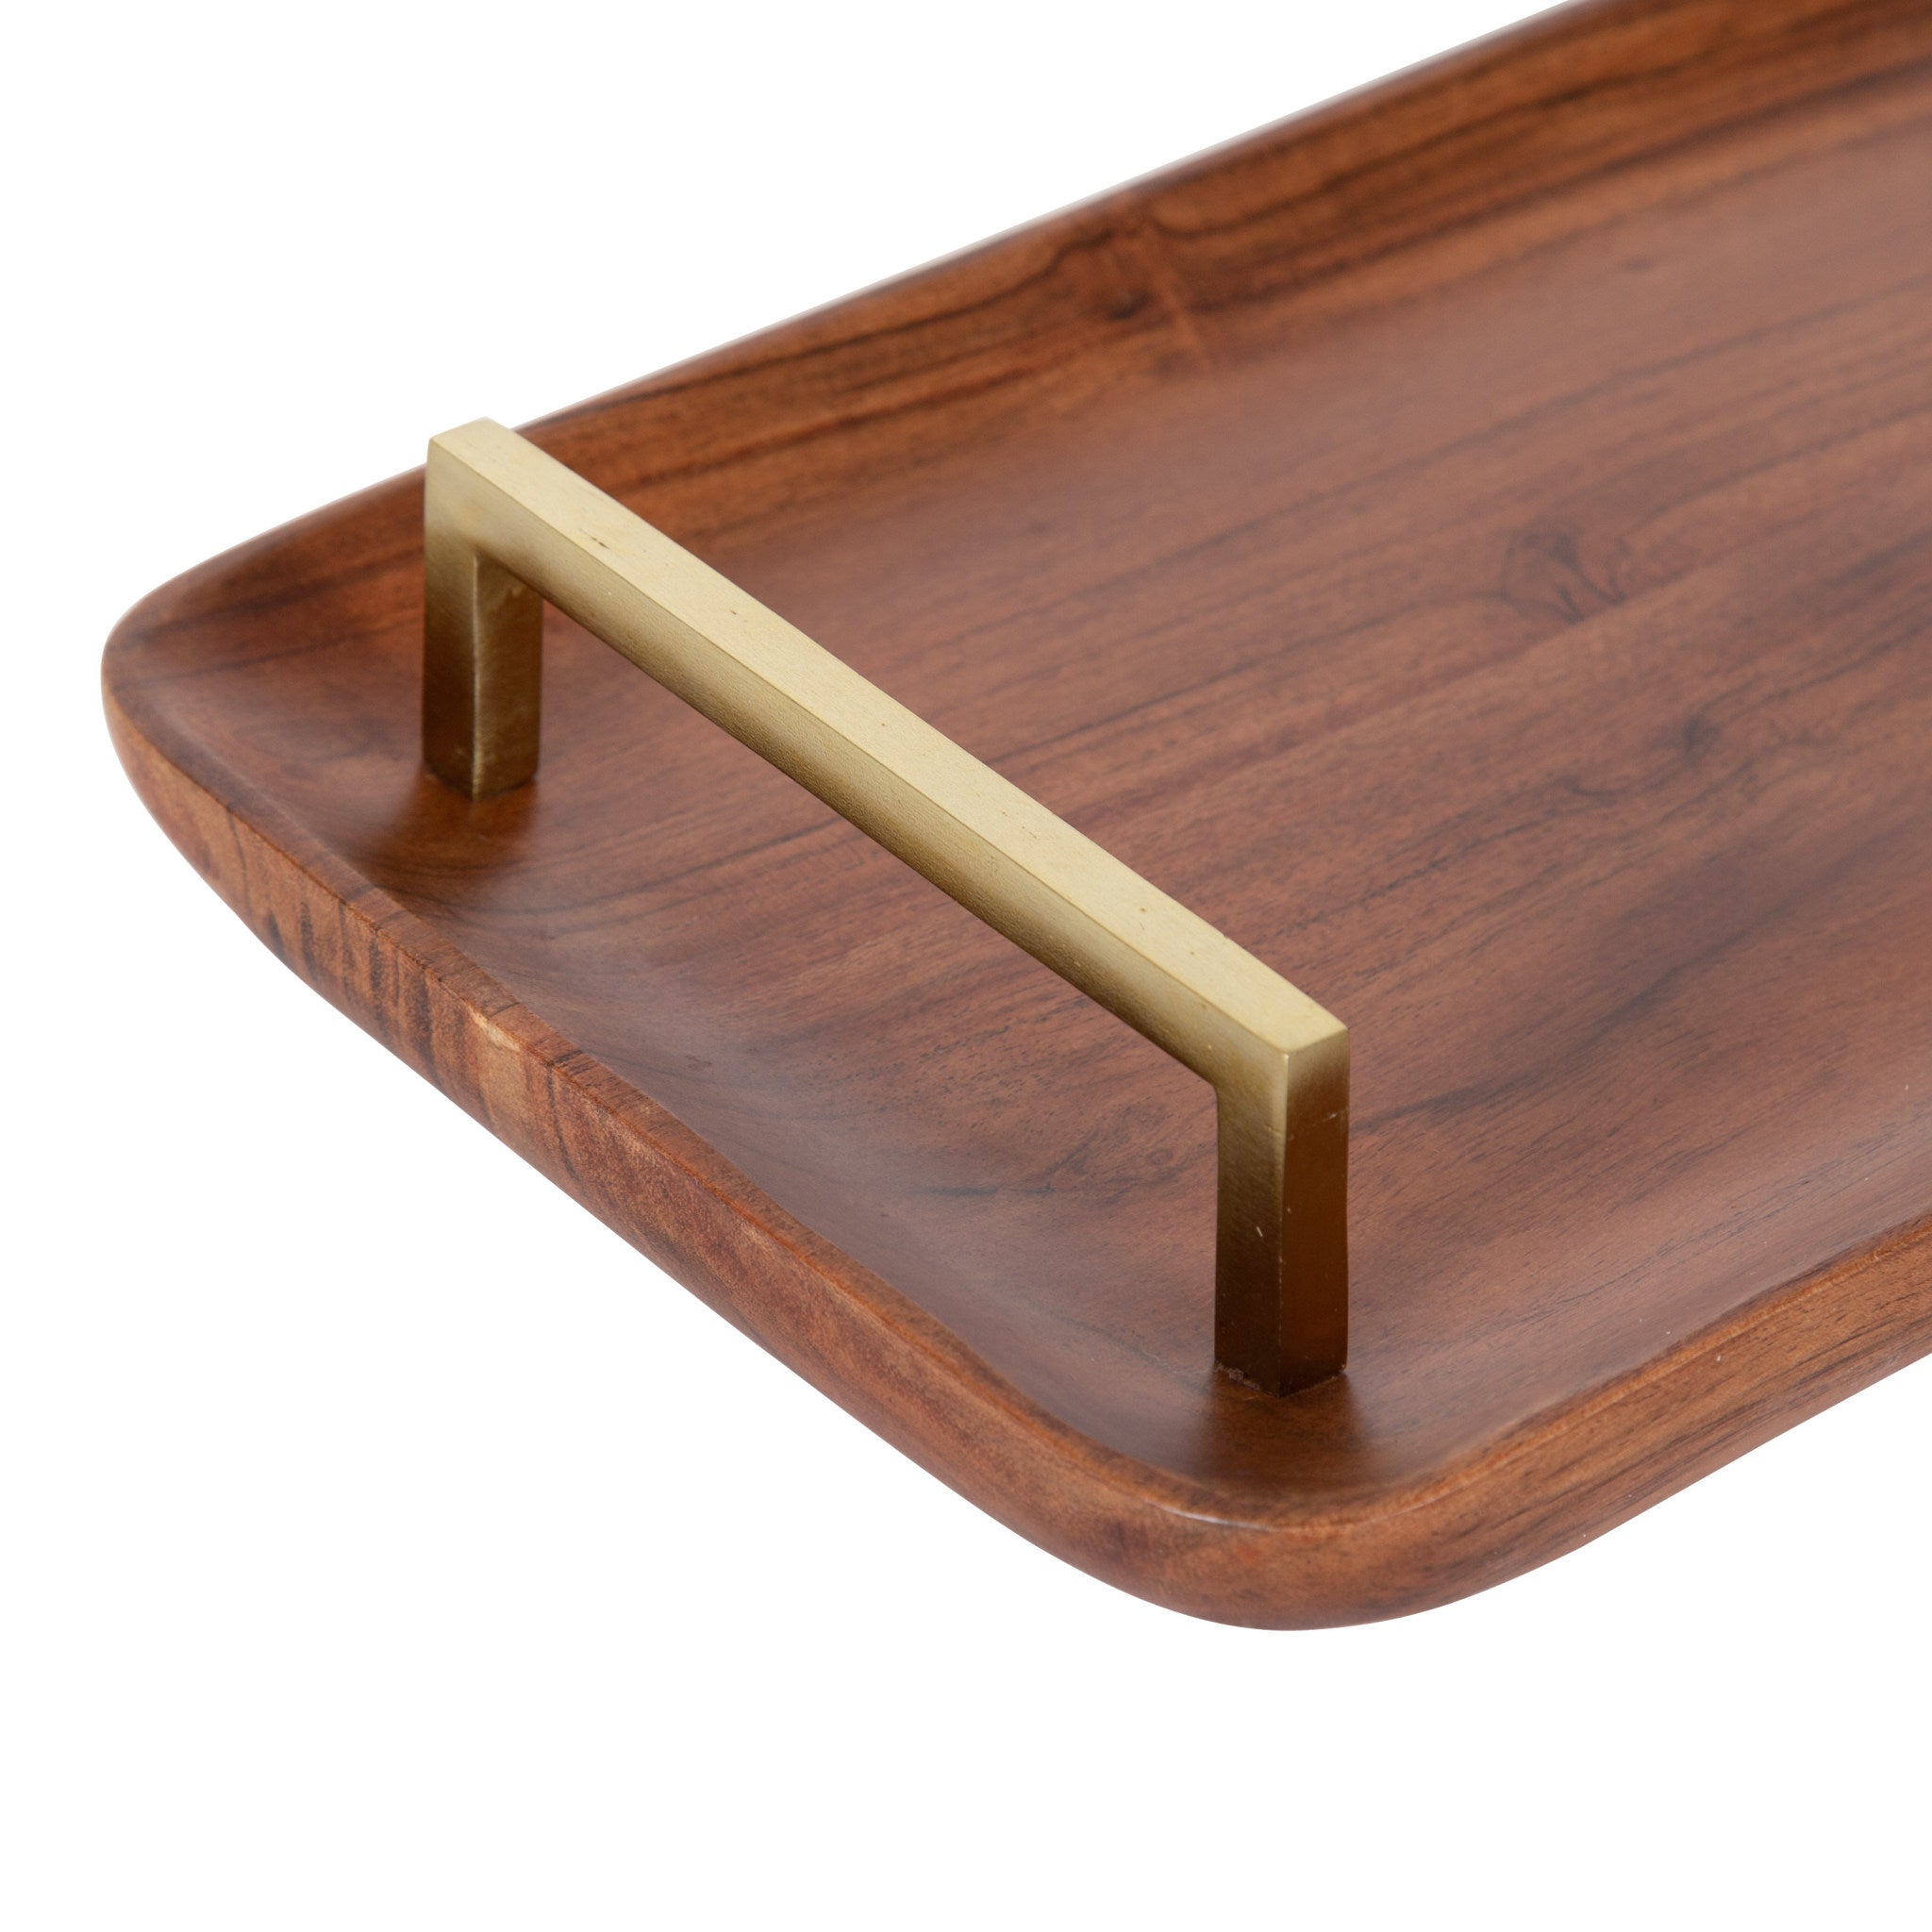 Cantwell Wood Decorative Tray